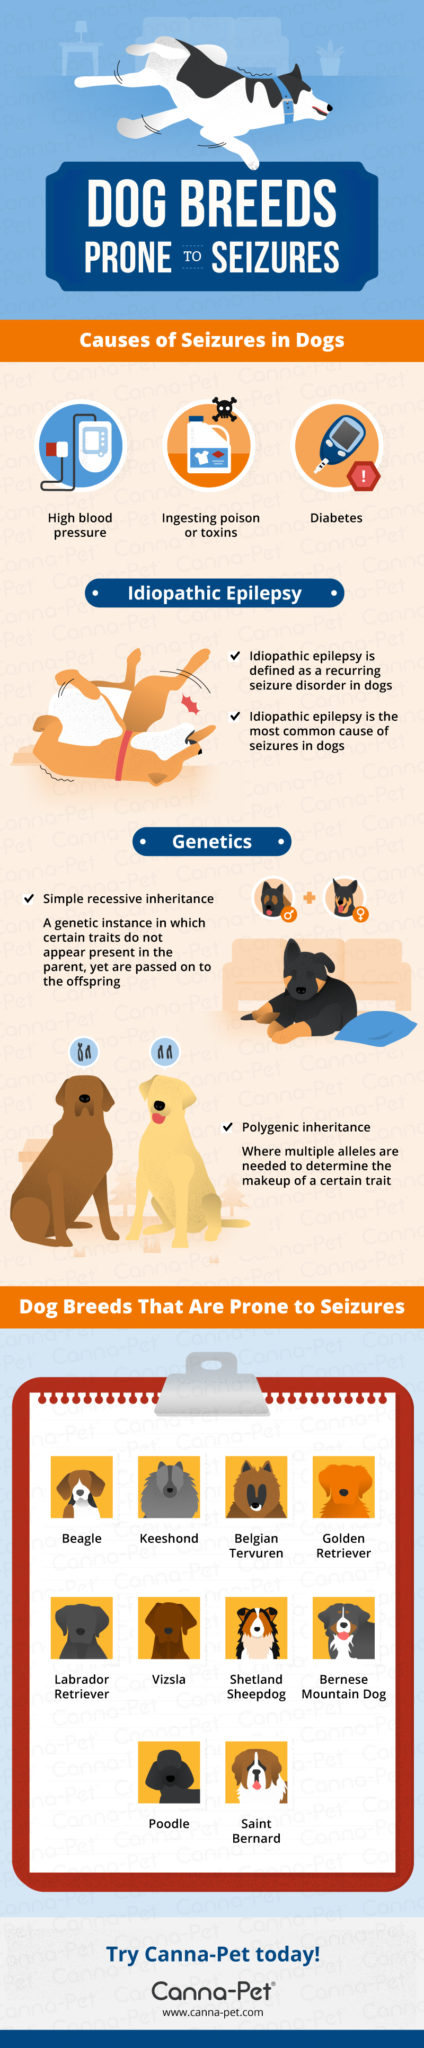 What Dog Breeds Are Prone to Seizures? | Canna-Pet